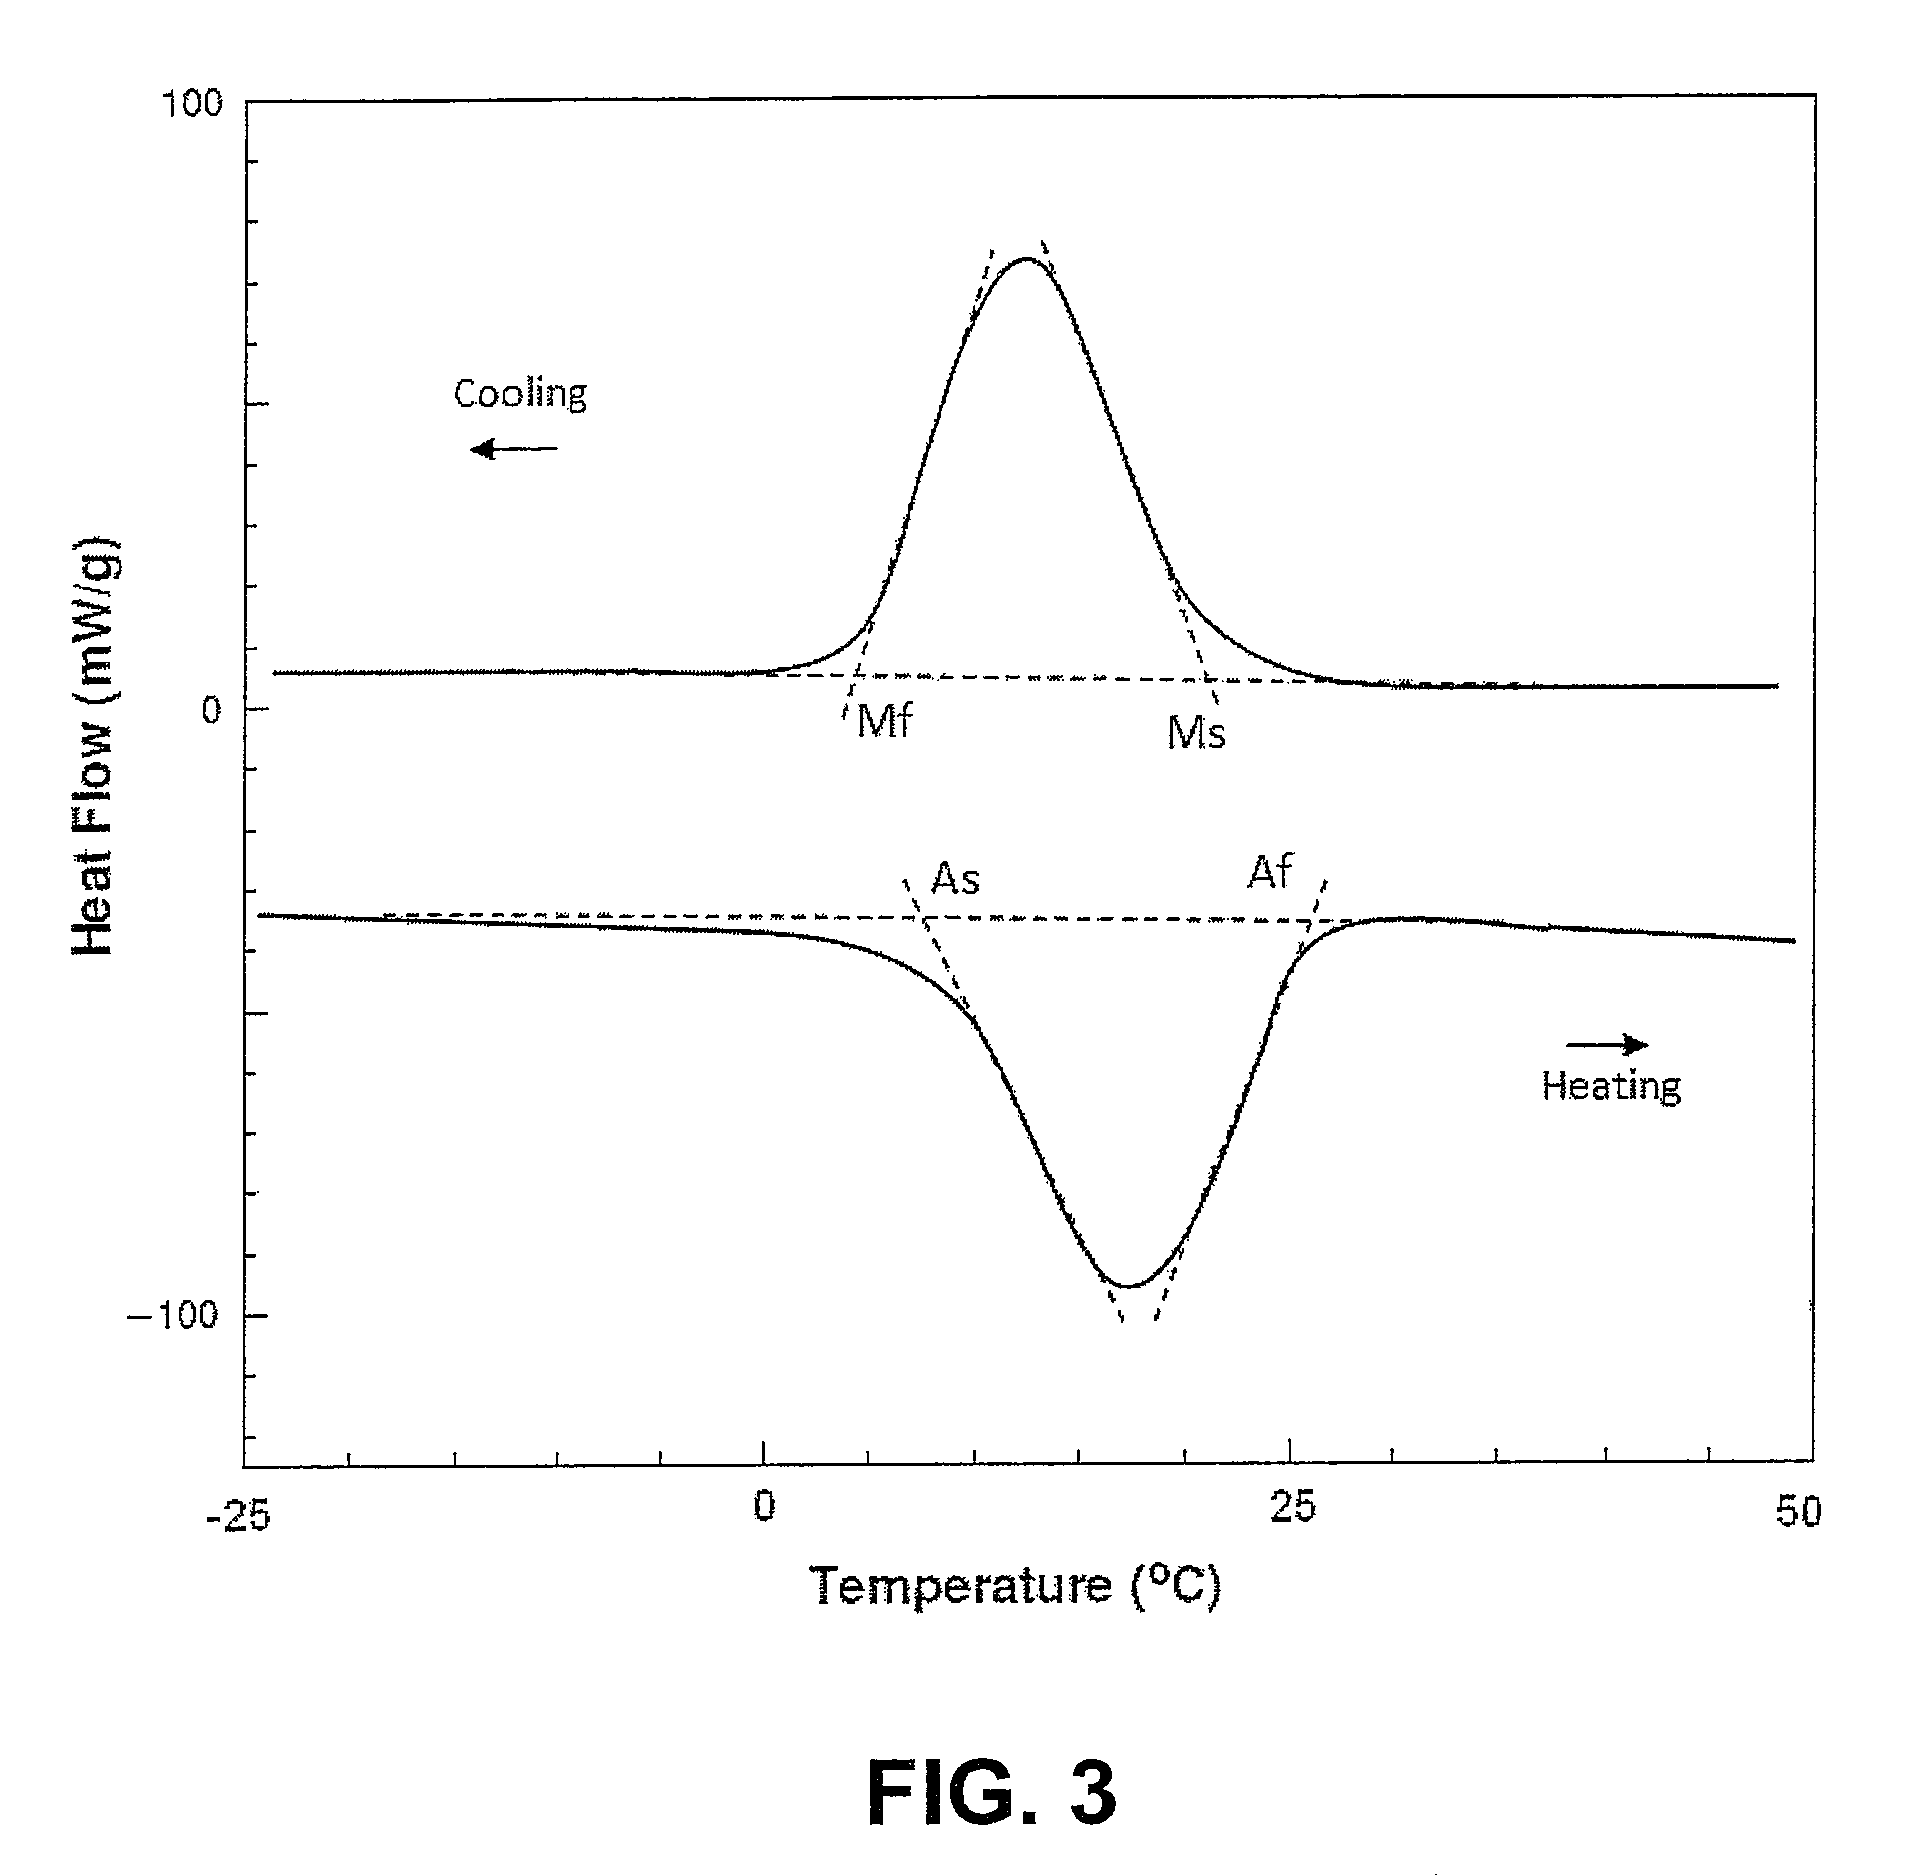 Endodontic instruments and methods of manufacturing thereof